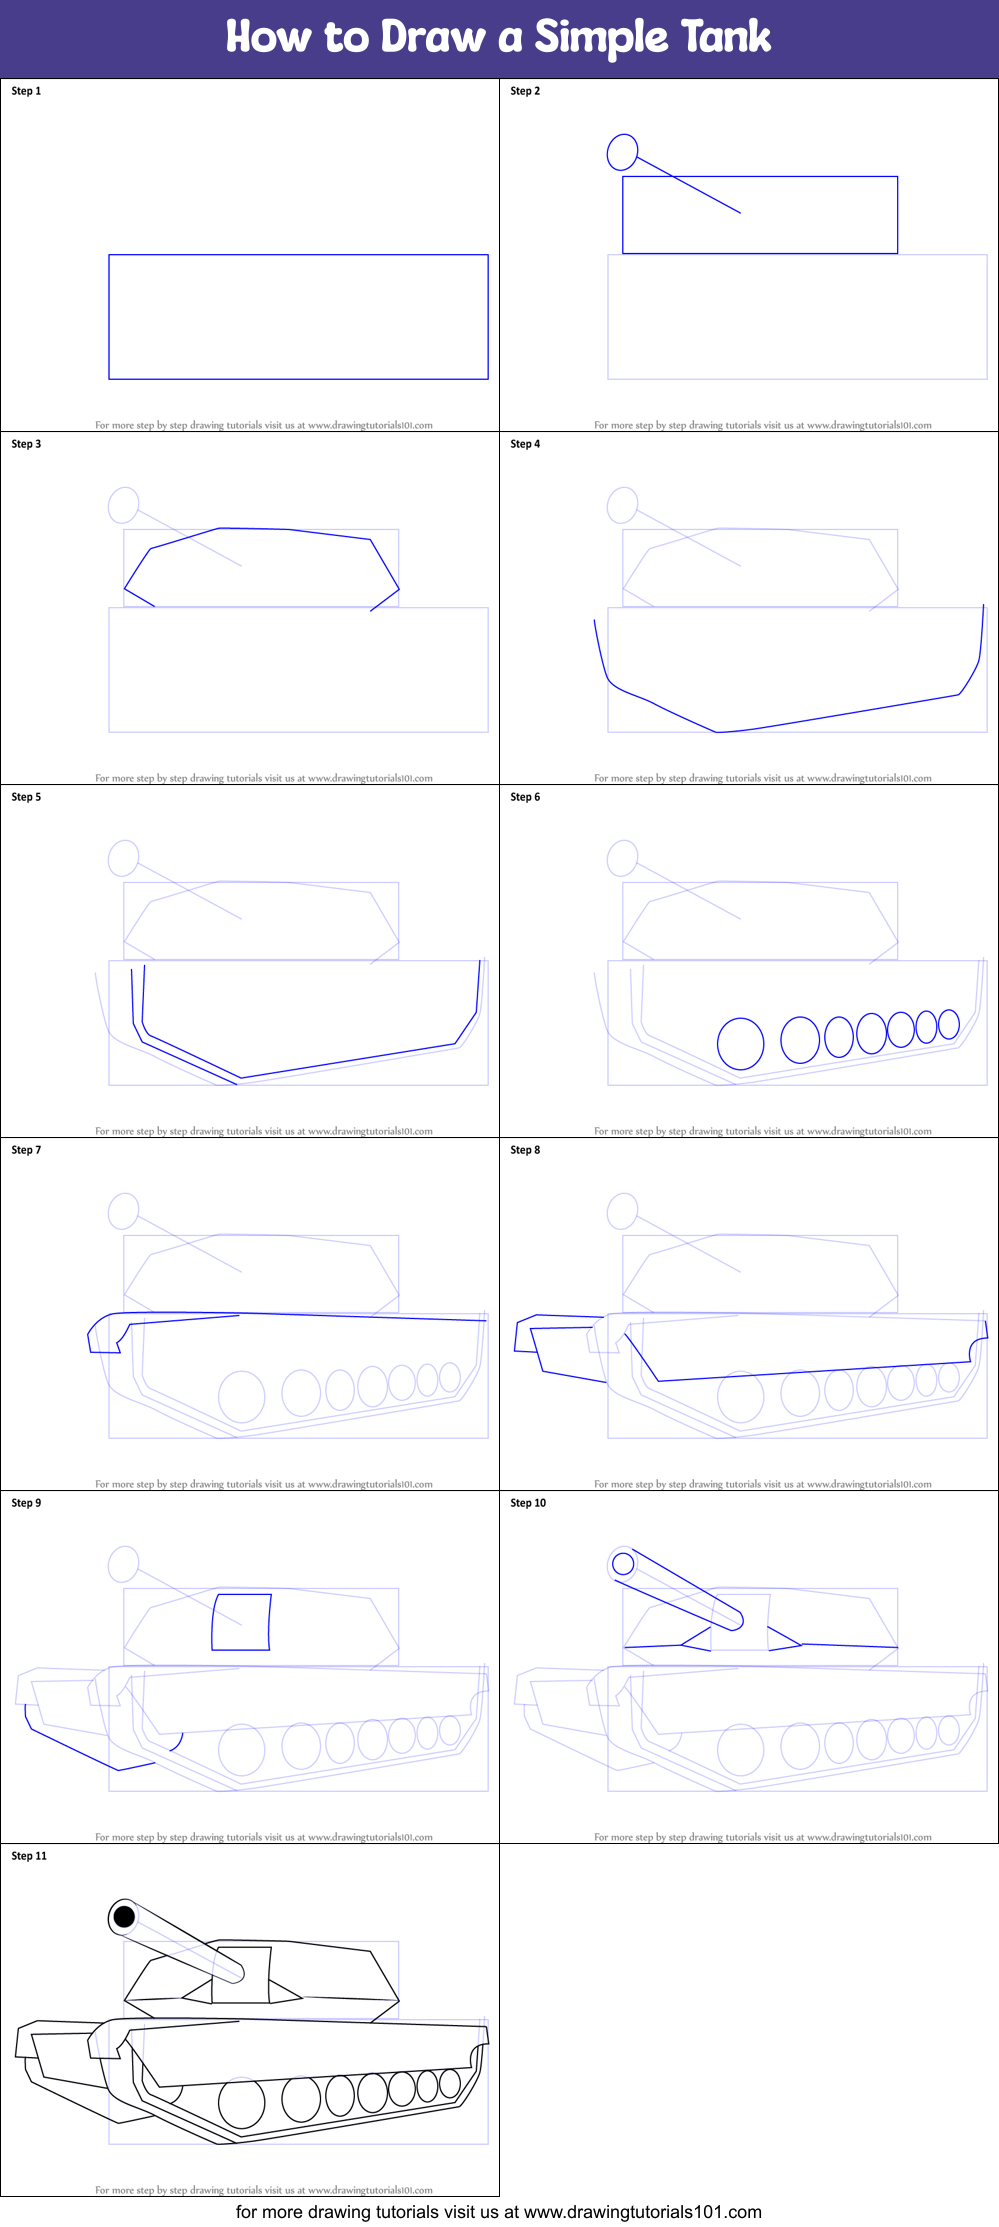 How to Draw a Simple Tank step by step